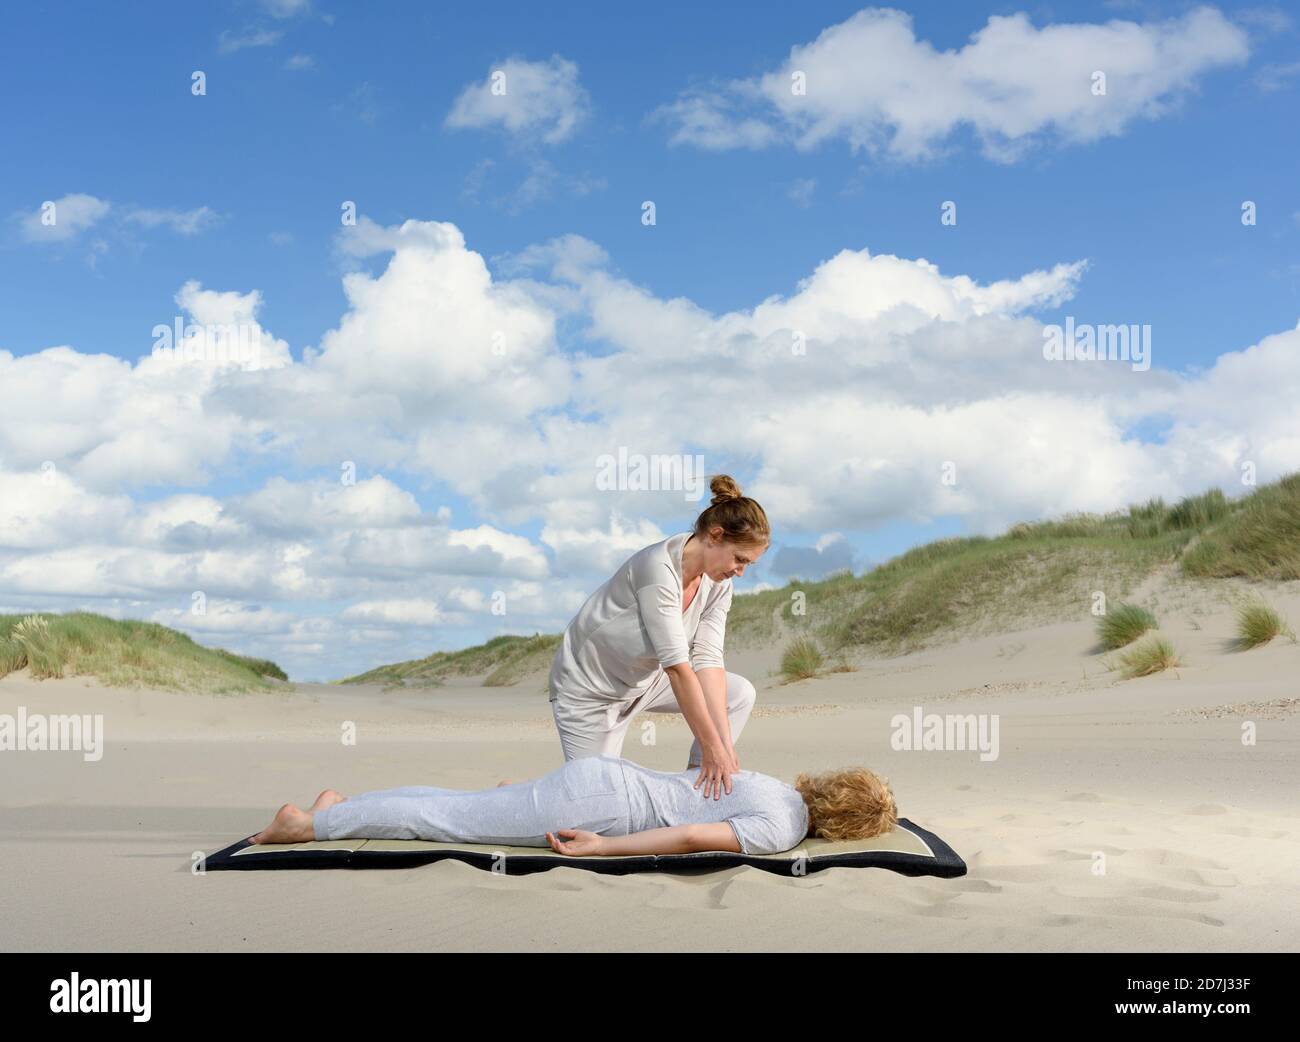 A professional masseuse at work on sand dunes, Oostkapelle, Zeeland, the Netherlands Stock Photo